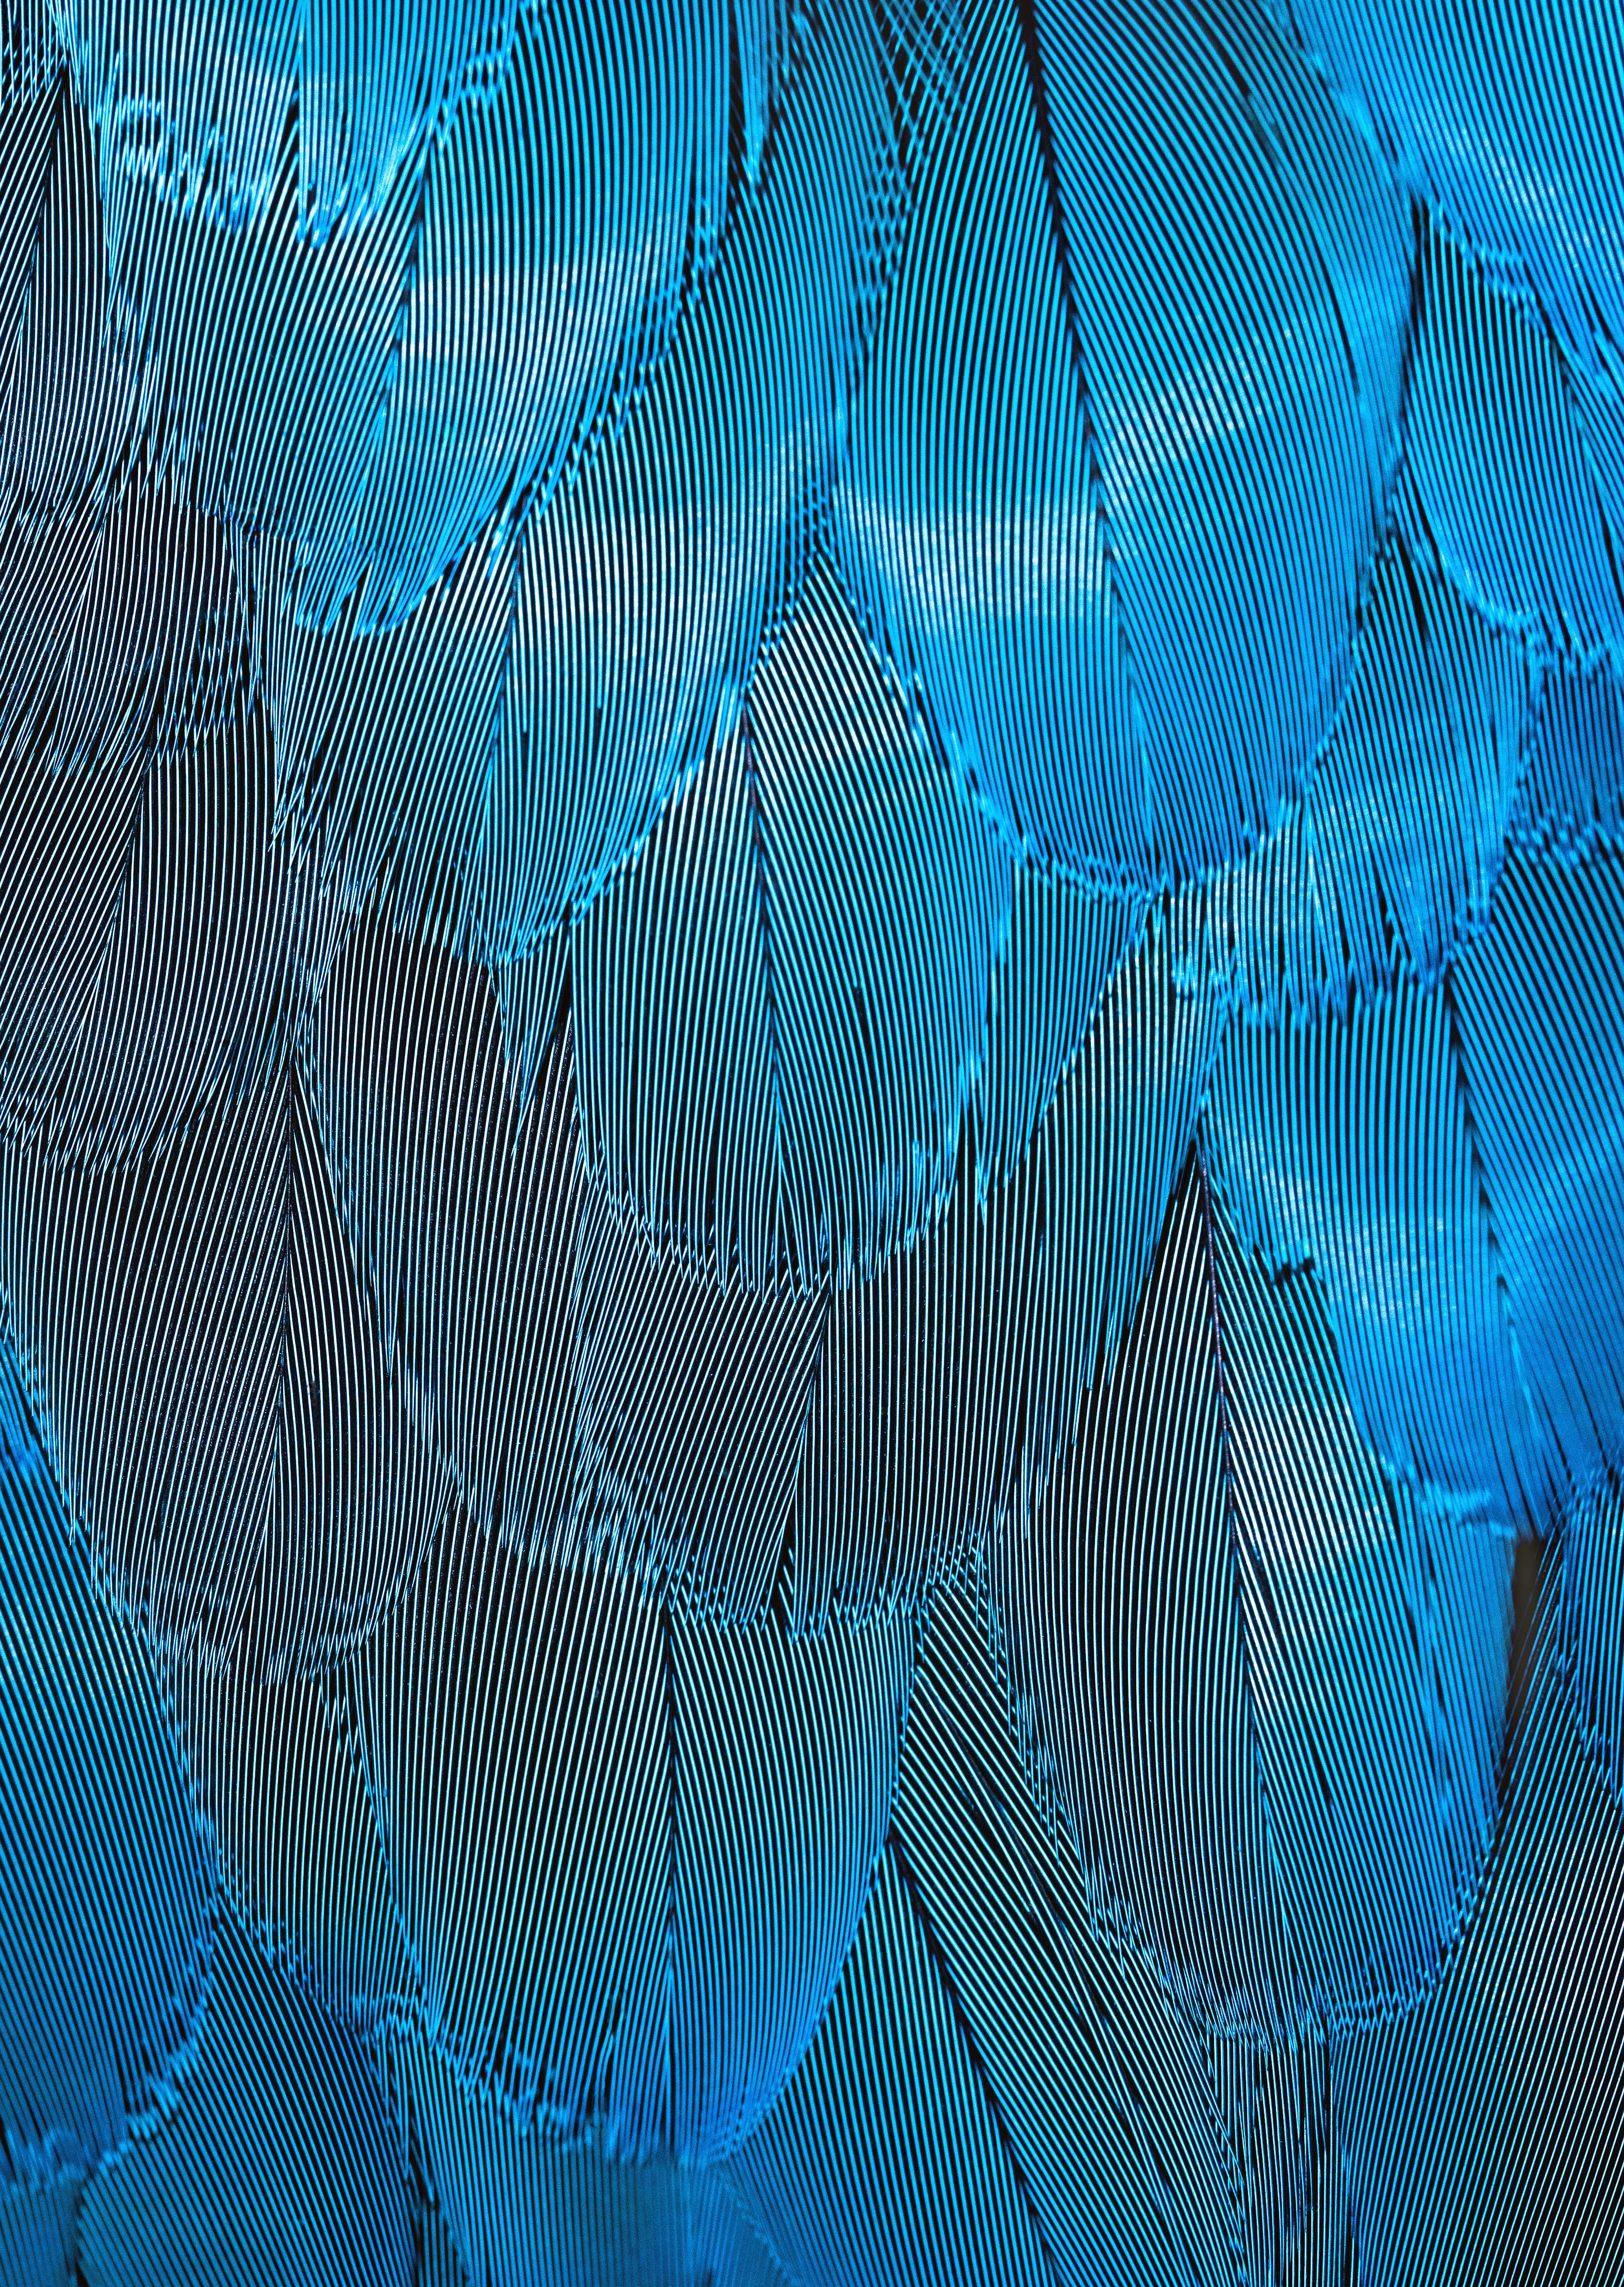 macro, textures, feather, blue, texture, iridescent wallpapers for tablet